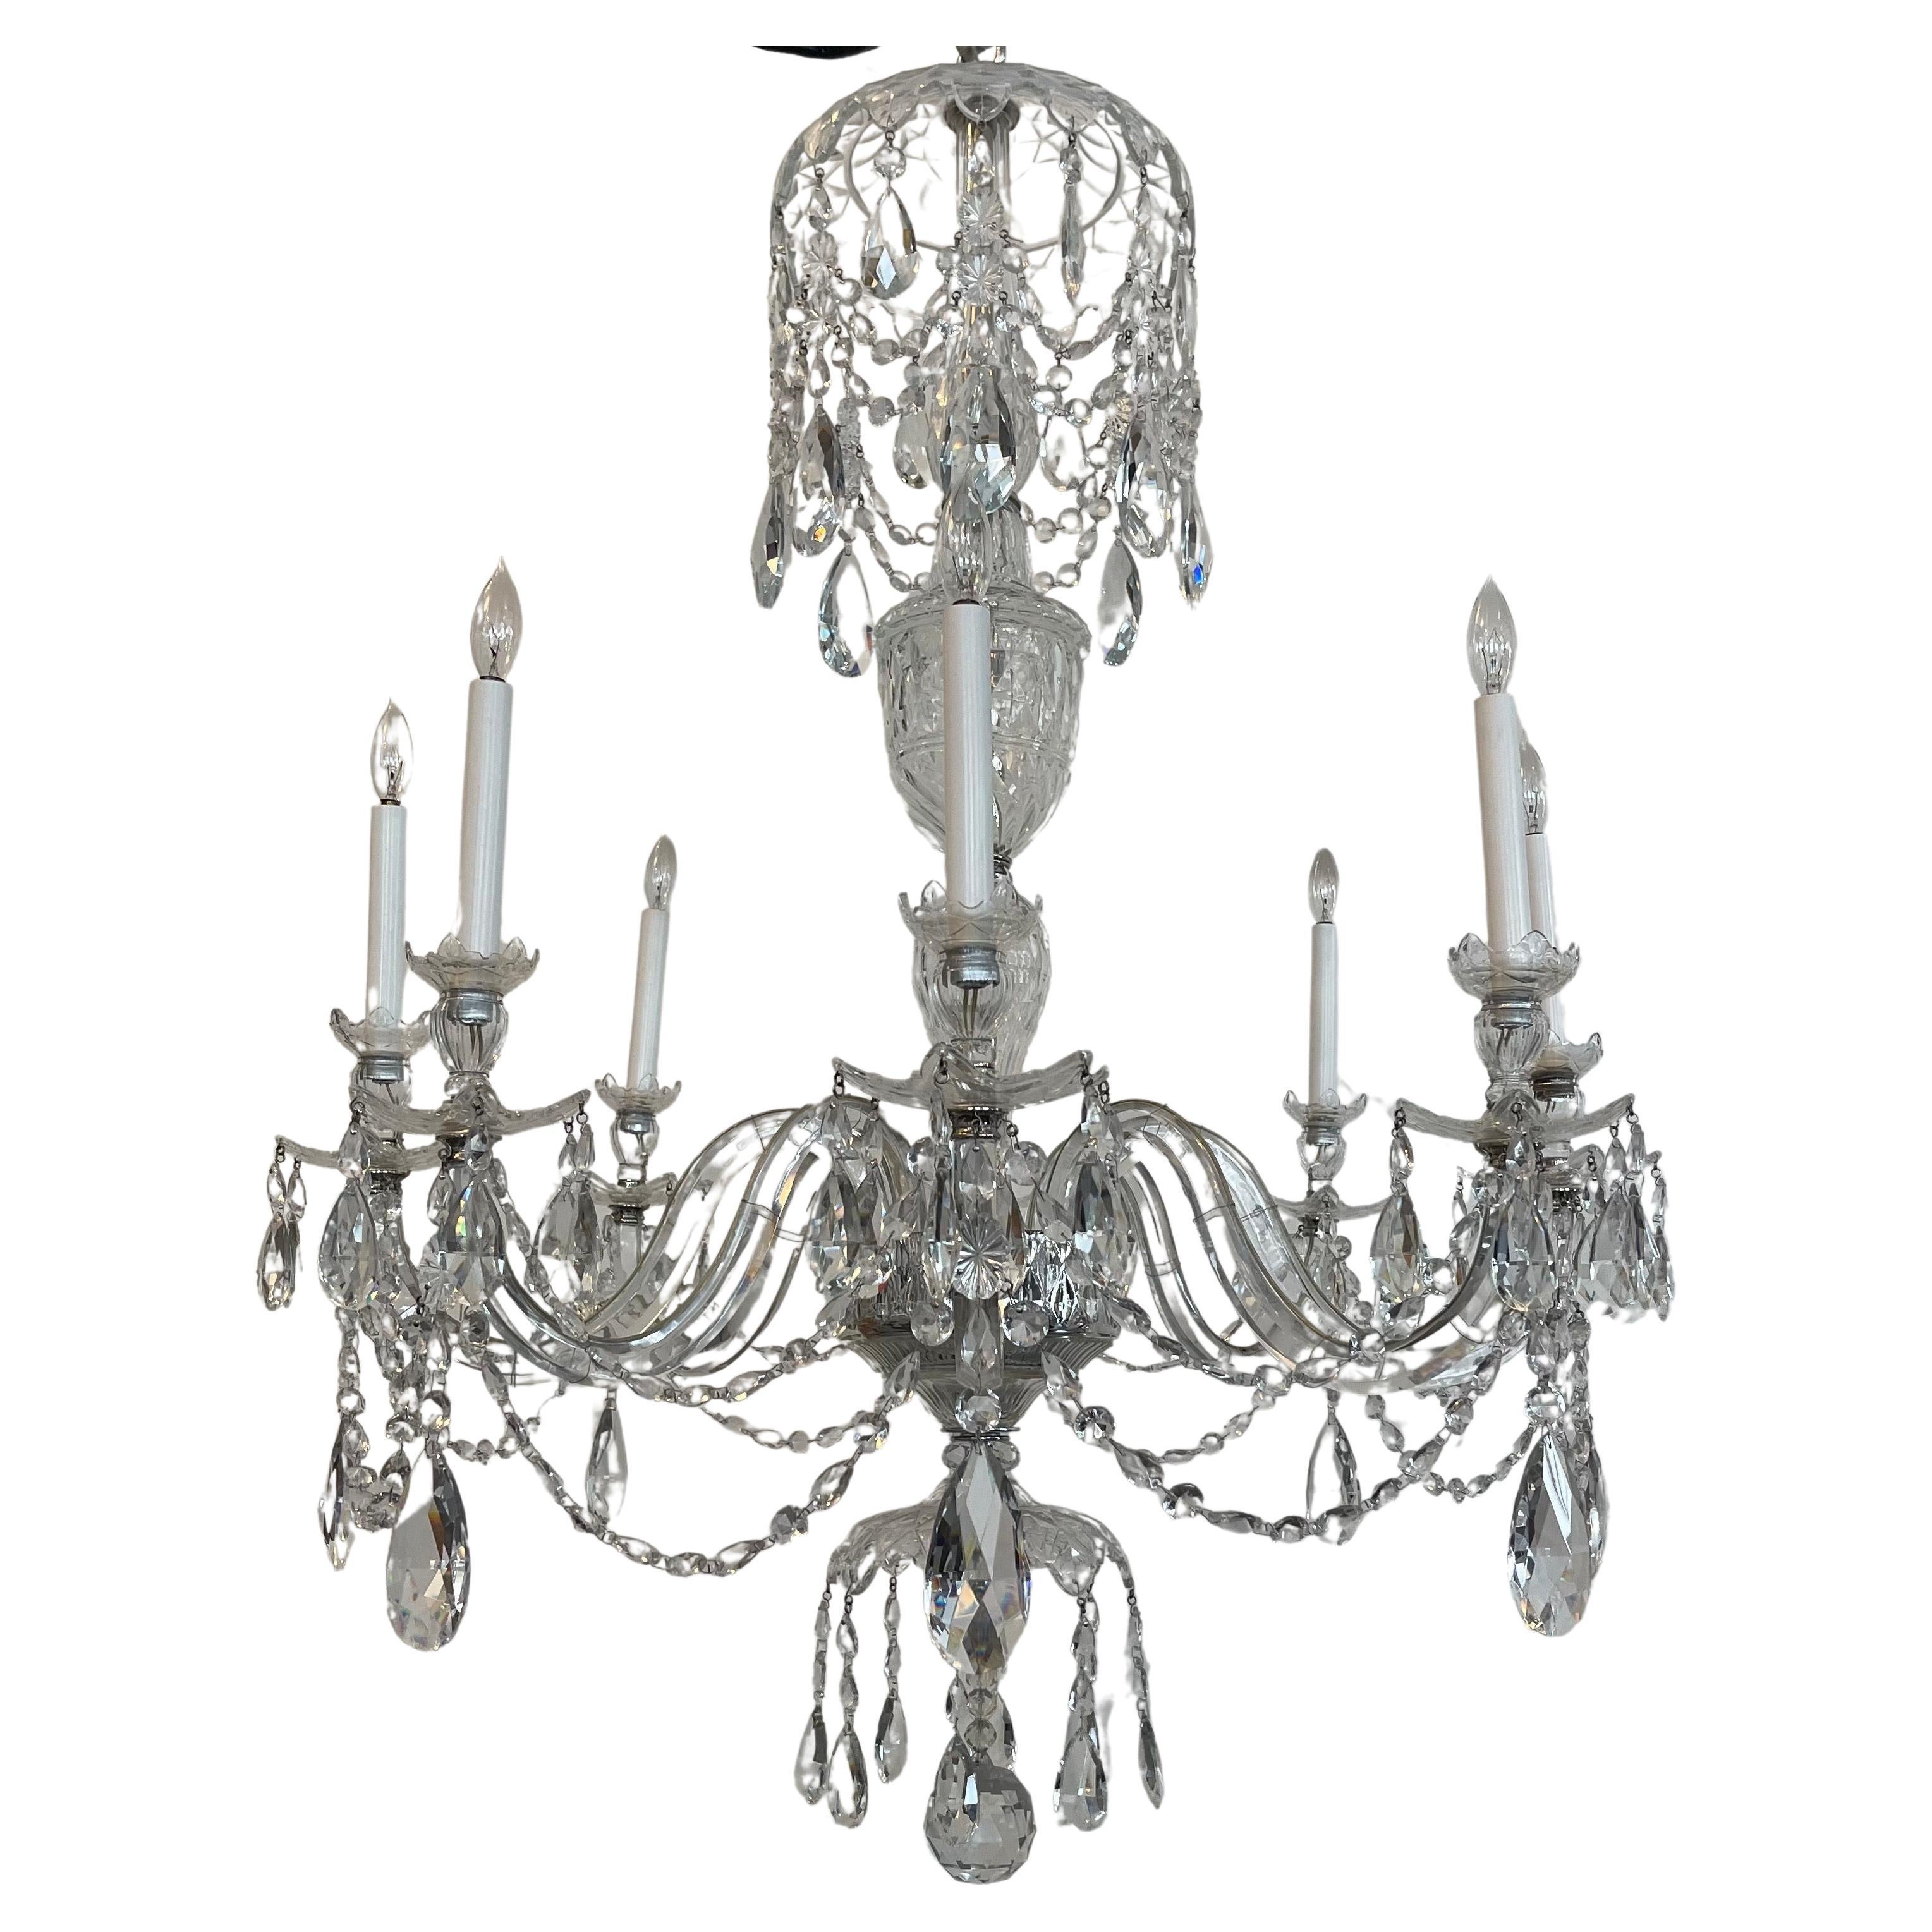 An Exquisite Large English / Georgian Crystal 8 Candelabra Light Chandelier With Multiple Layers Of Crystal Swags And Faceted Crystal Drops Enhancing This Truly Breathtaking Substantial Chandelier, Wiring Has Been Updated And Comes Ready To Install